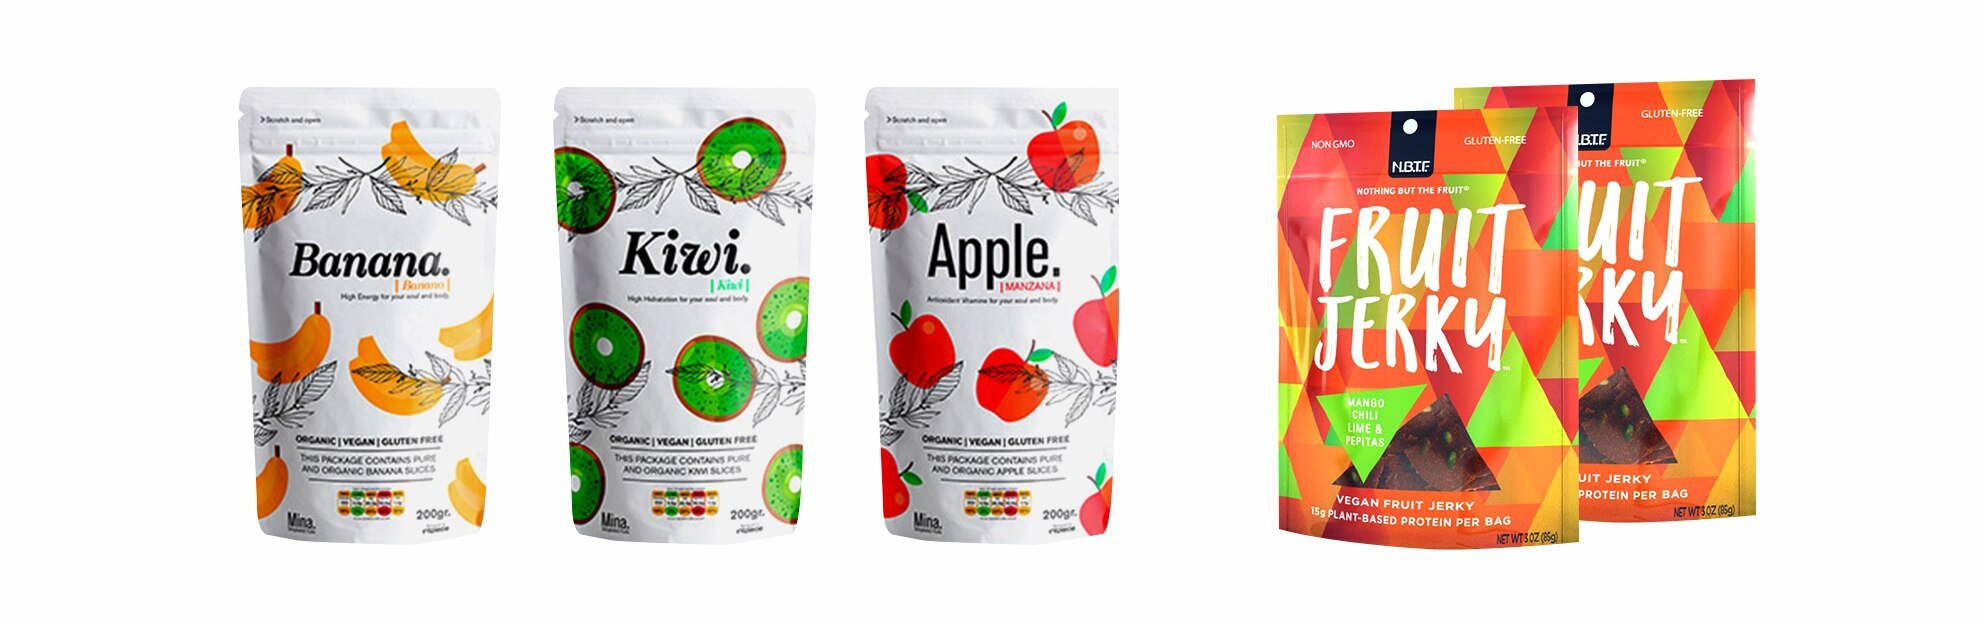 custom-made-printed-mockup-stand-up-doy-pouch-bags-dry-organic-fruit-jerky-packaging.jpg